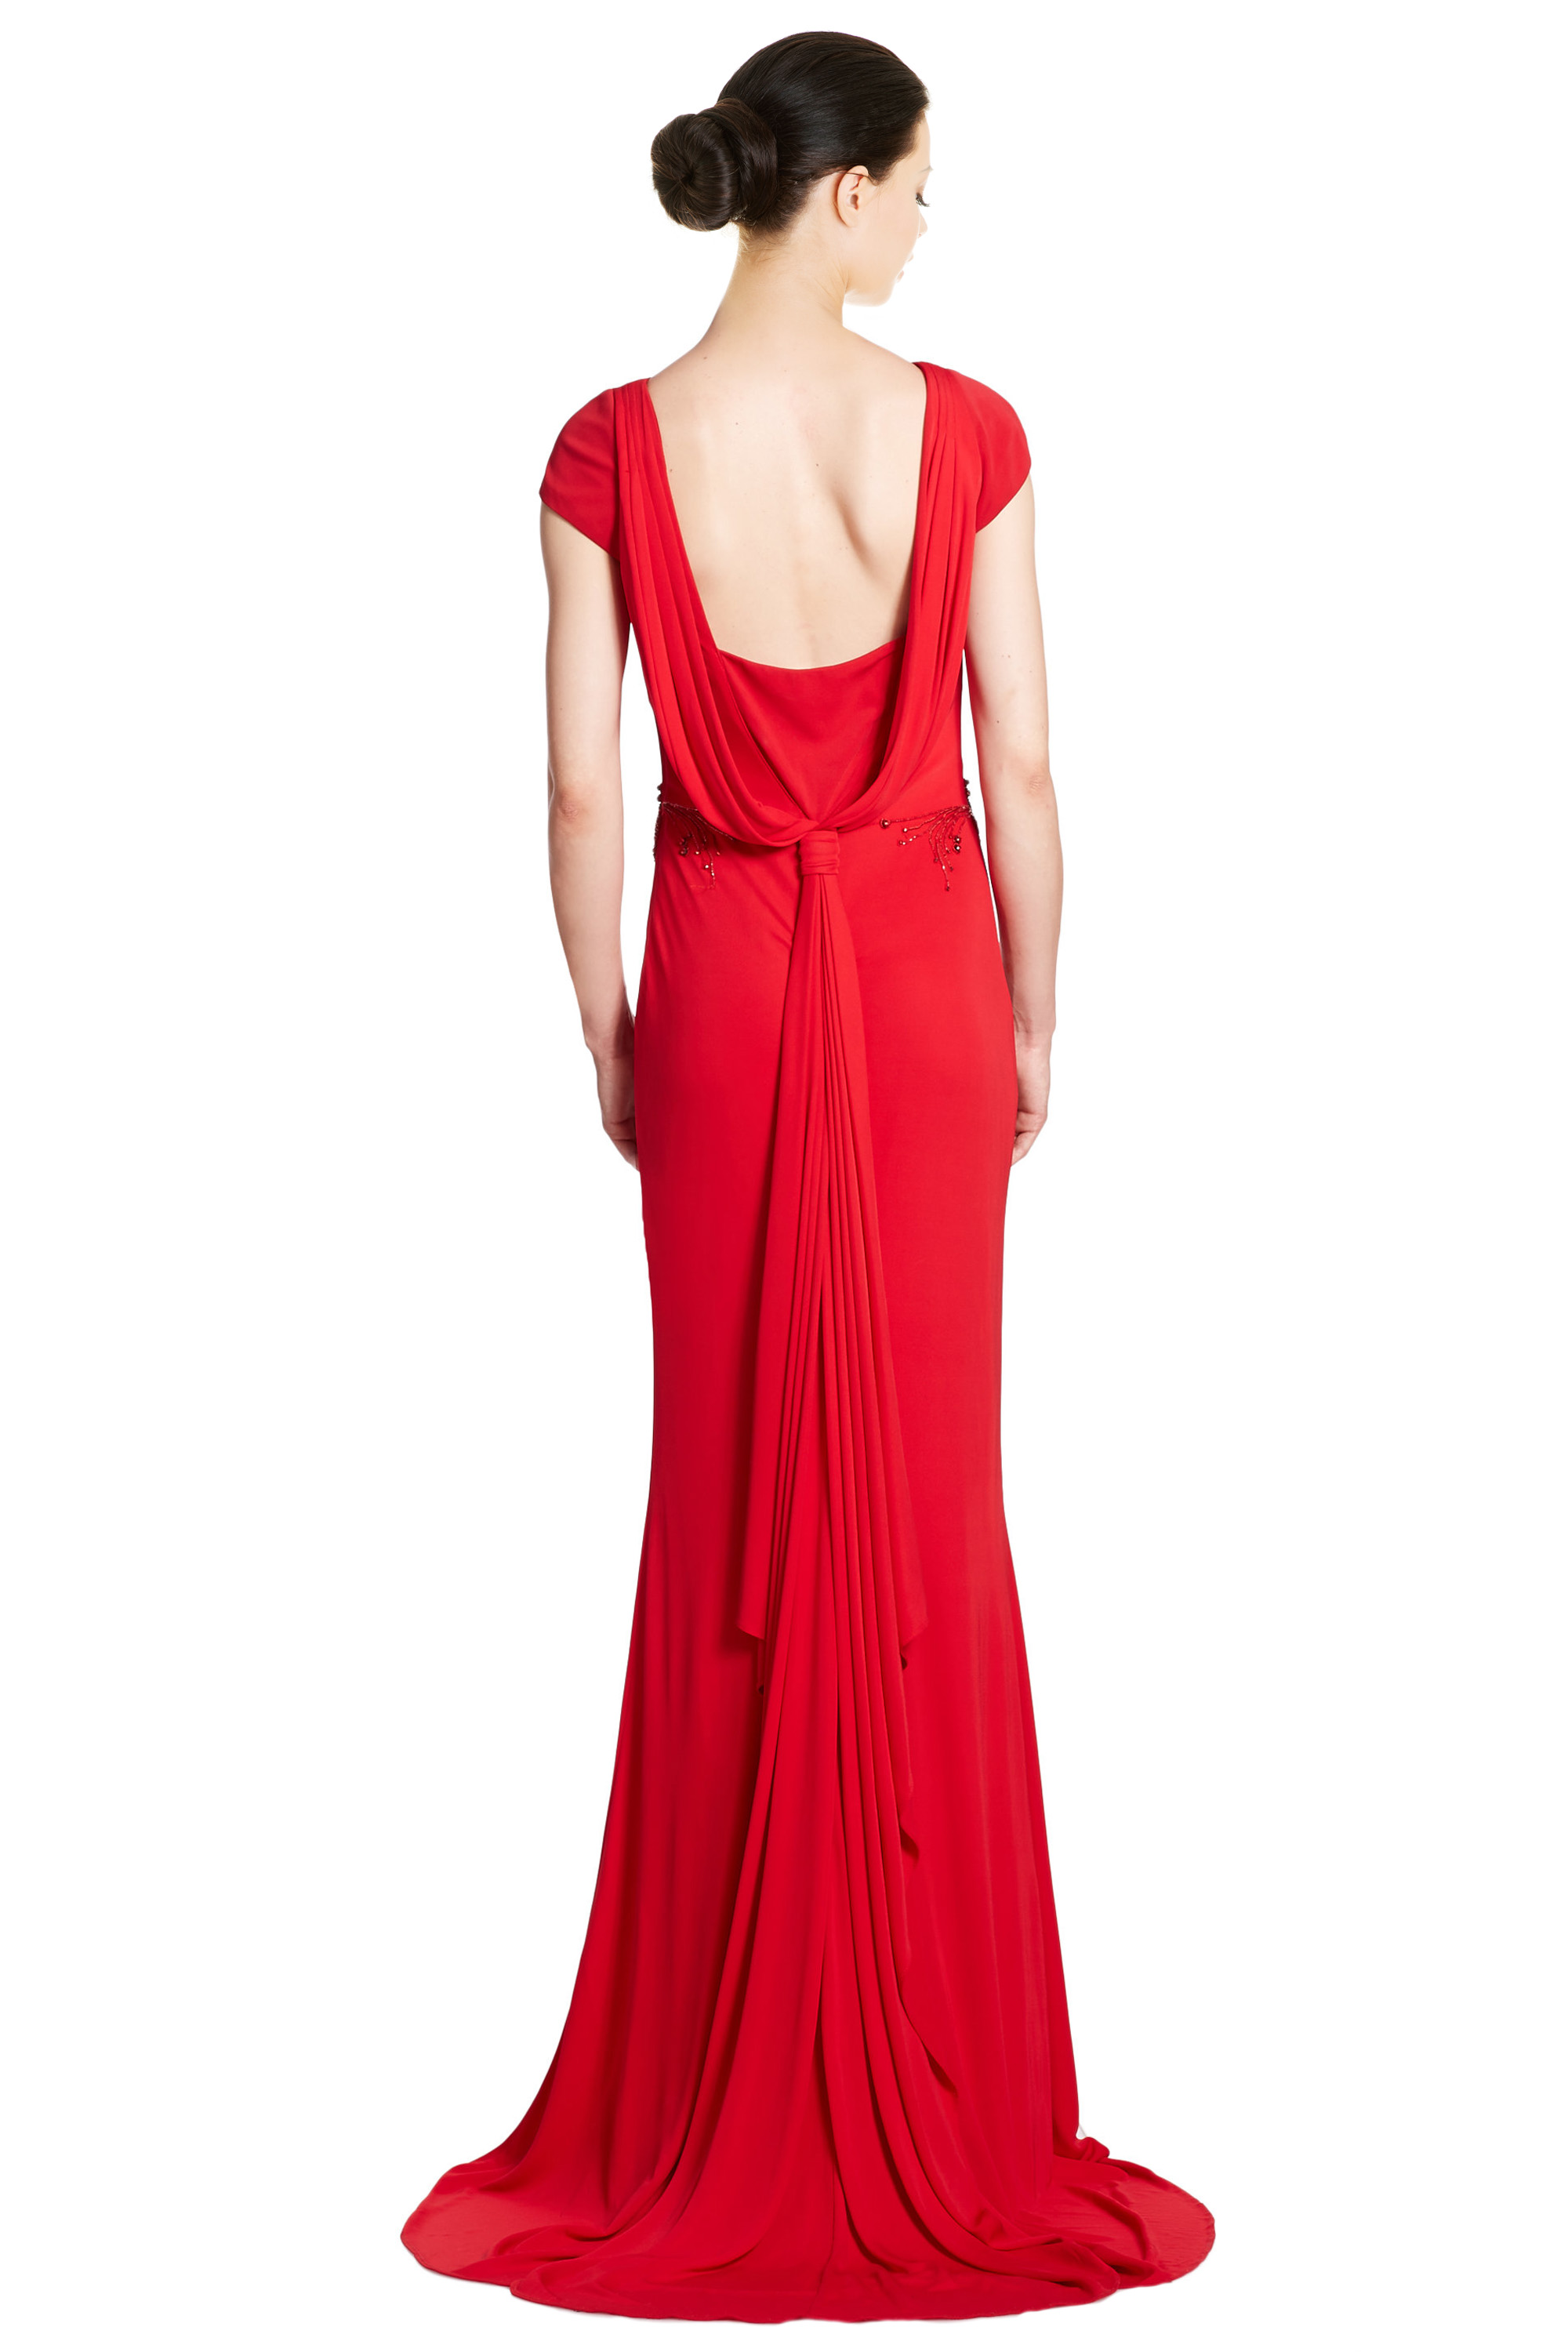 Badgley Mischka Beaded Draped Back Jersey Evening Gown Dress - image 2 of 3